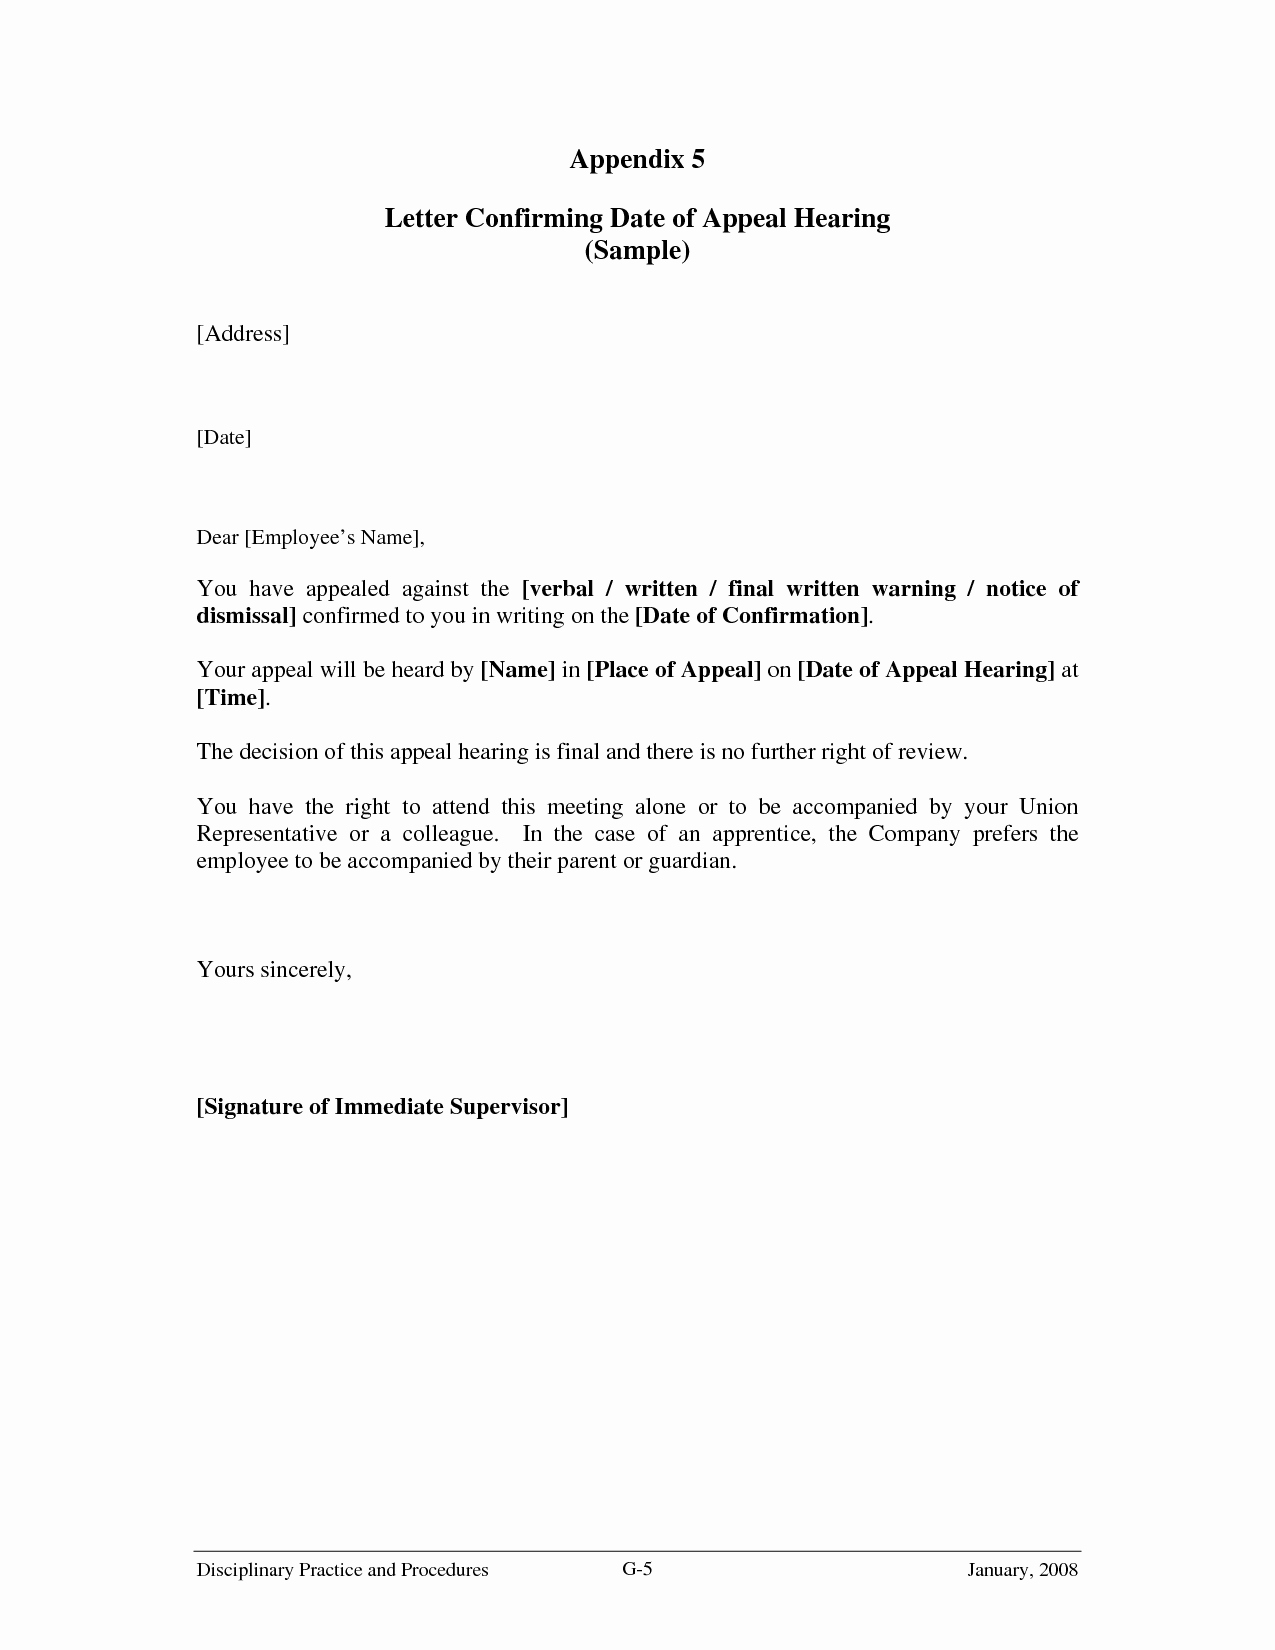 Speeding Ticket Appeal Letter Template Beautiful Dismissal Appeal Letter Appeal May Be Submitted In the